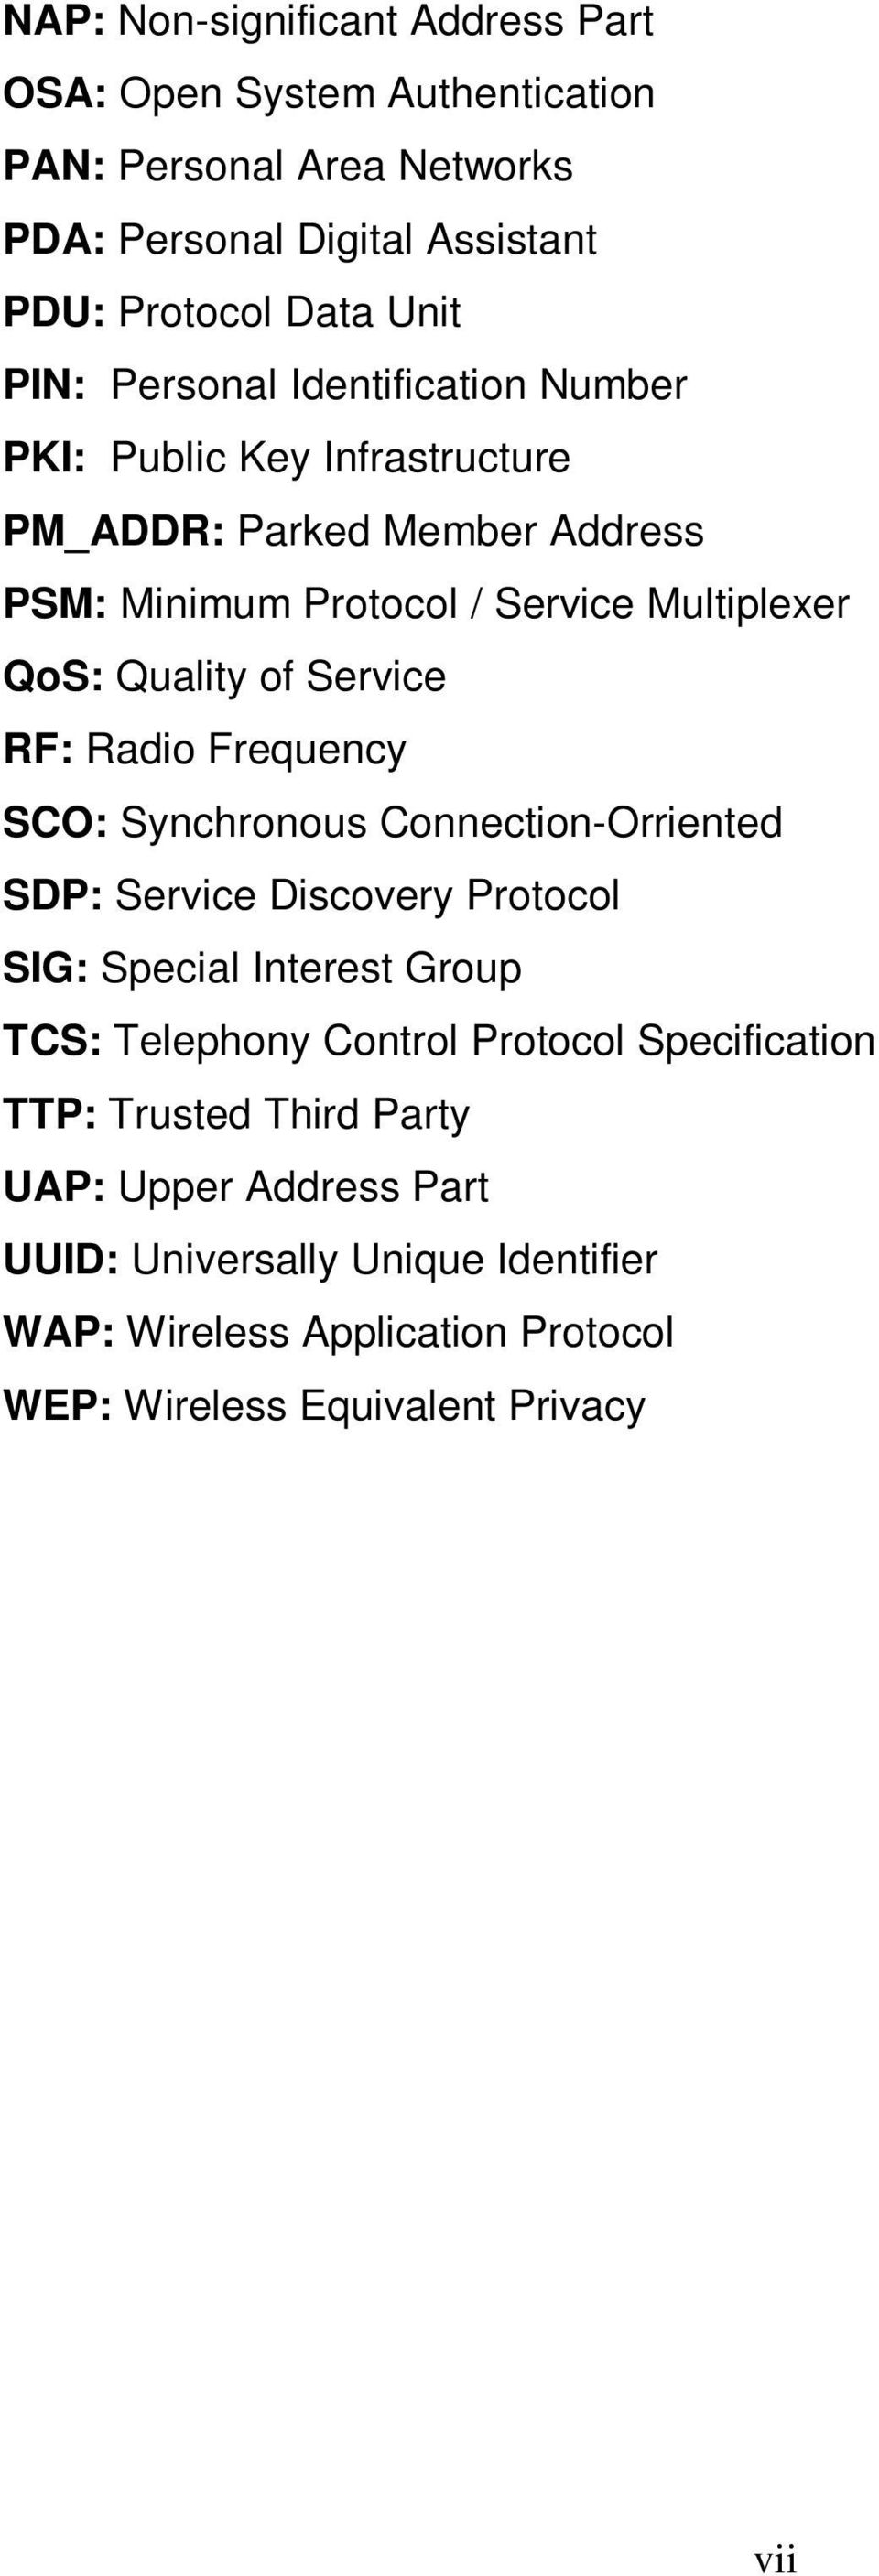 Service RF: Radio Frequency SCO: Synchronous Connection-Orriented SDP: Service Discovery Protocol SIG: Special Interest Group TCS: Telephony Control Protocol